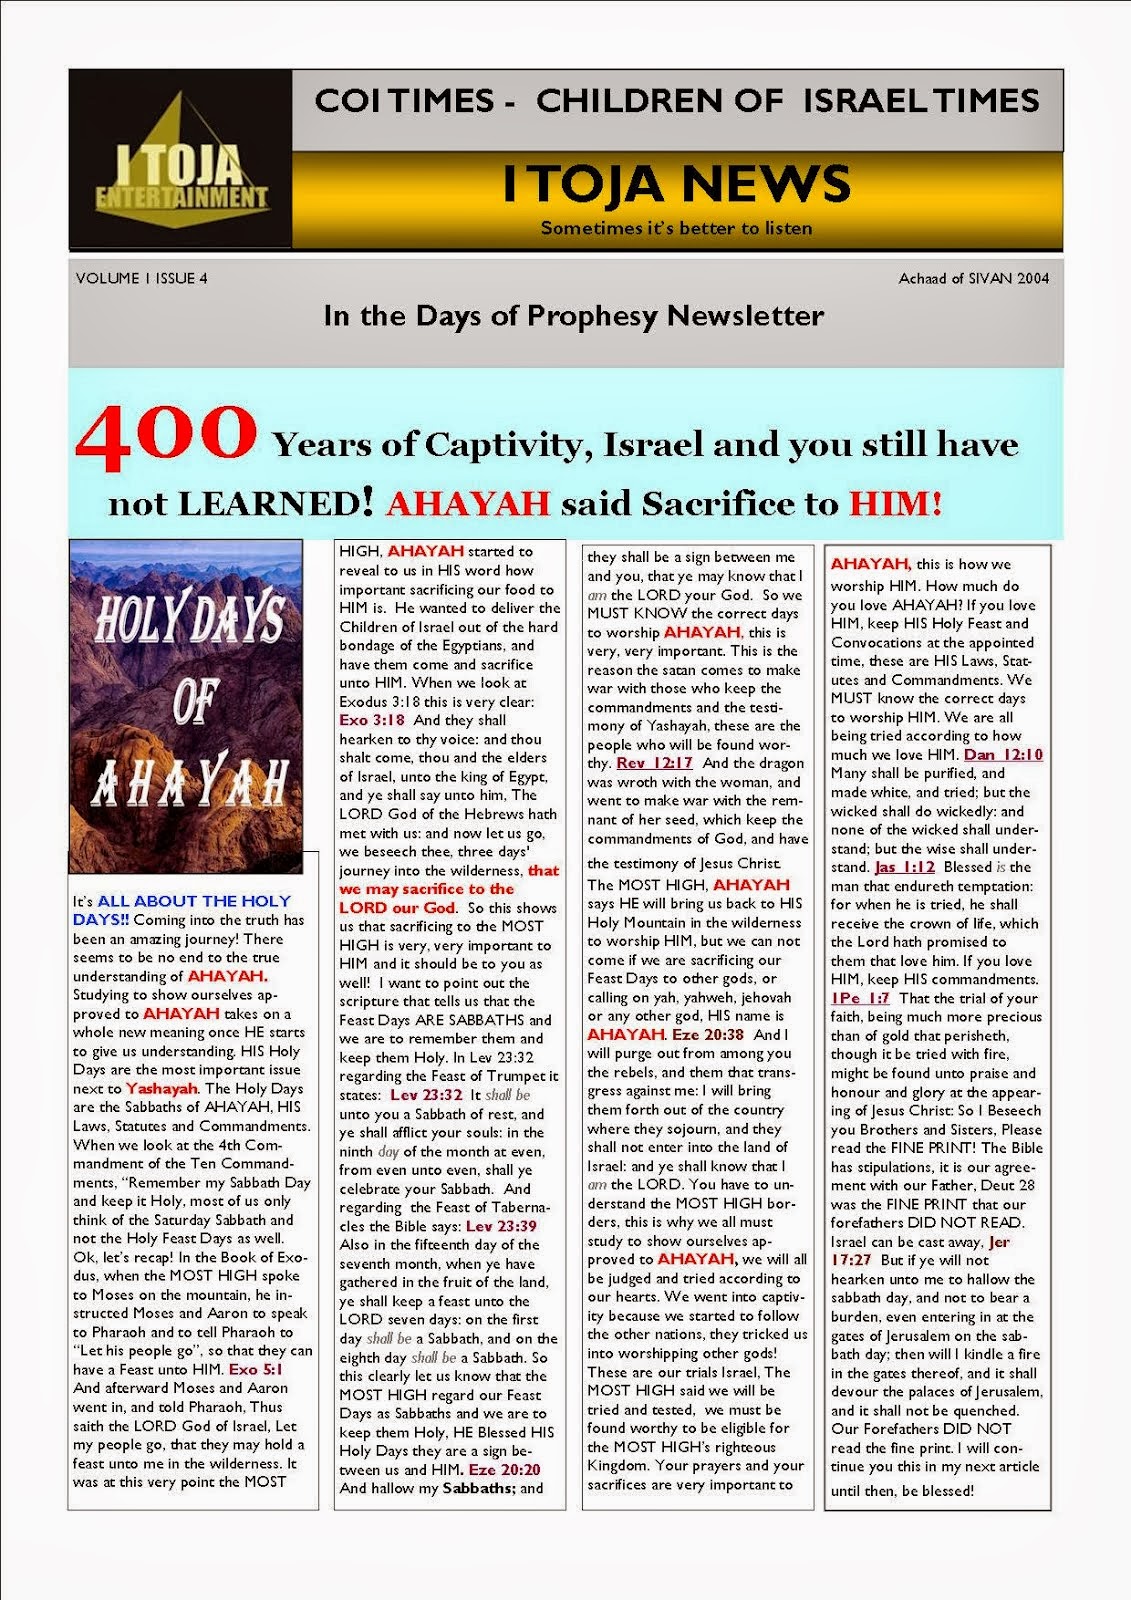 Holy Days Article